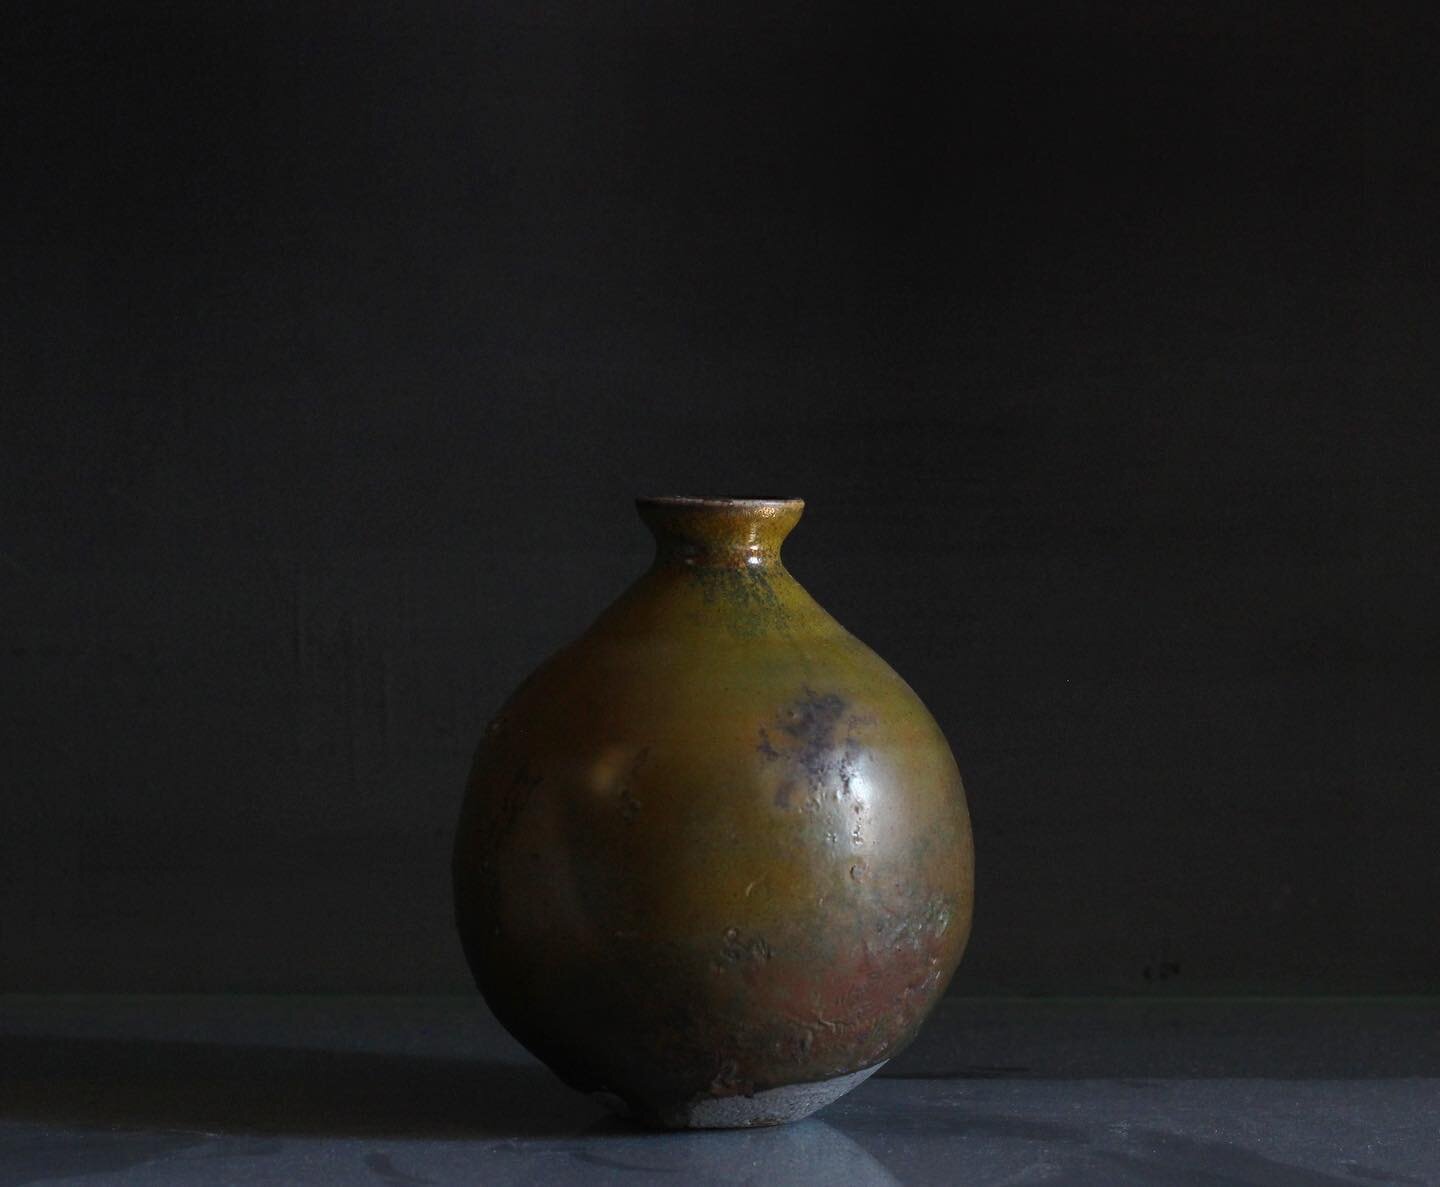 Kuro garatsu (black Karatsu) tokkuri. Glazed with an ame glaze and fired in the first chamber combined with firebox of the noborigama which gave all those wonderful colours. The word for sake bottle in Japanese is ideophonic. Japanese loves onomatopo